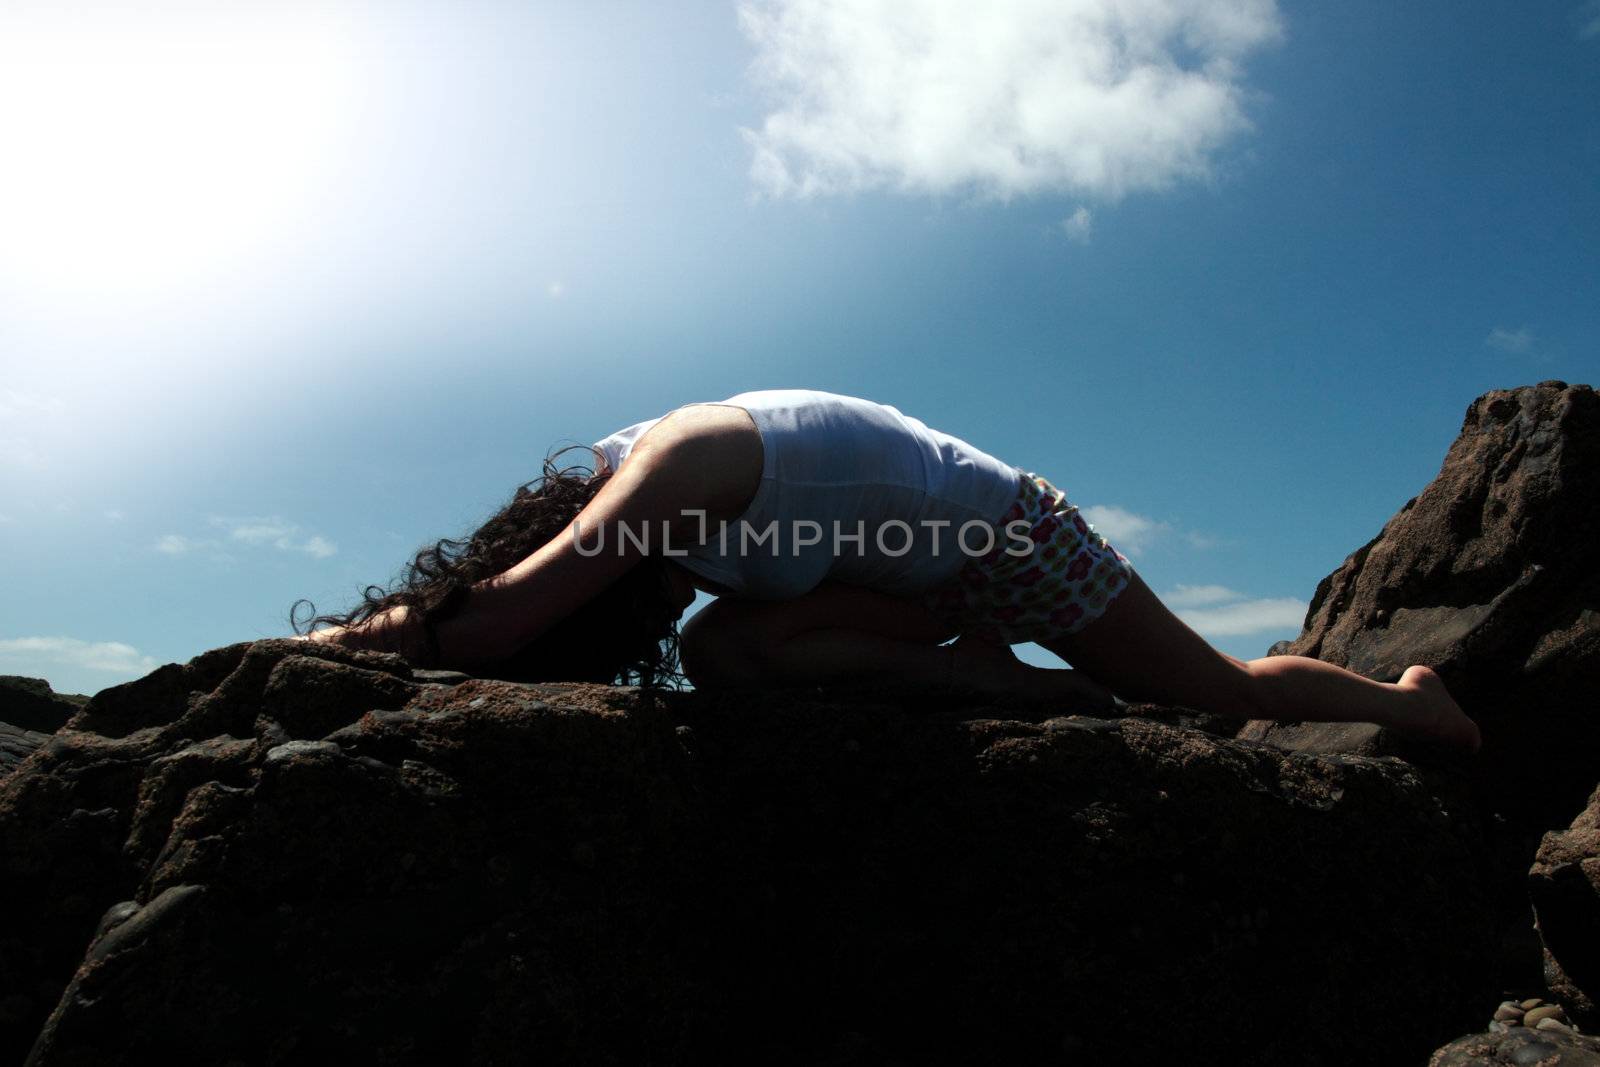 a beautiful woman doing yoga to show a healthy way to live a happy and relaxed lifestyle in a world full of stress